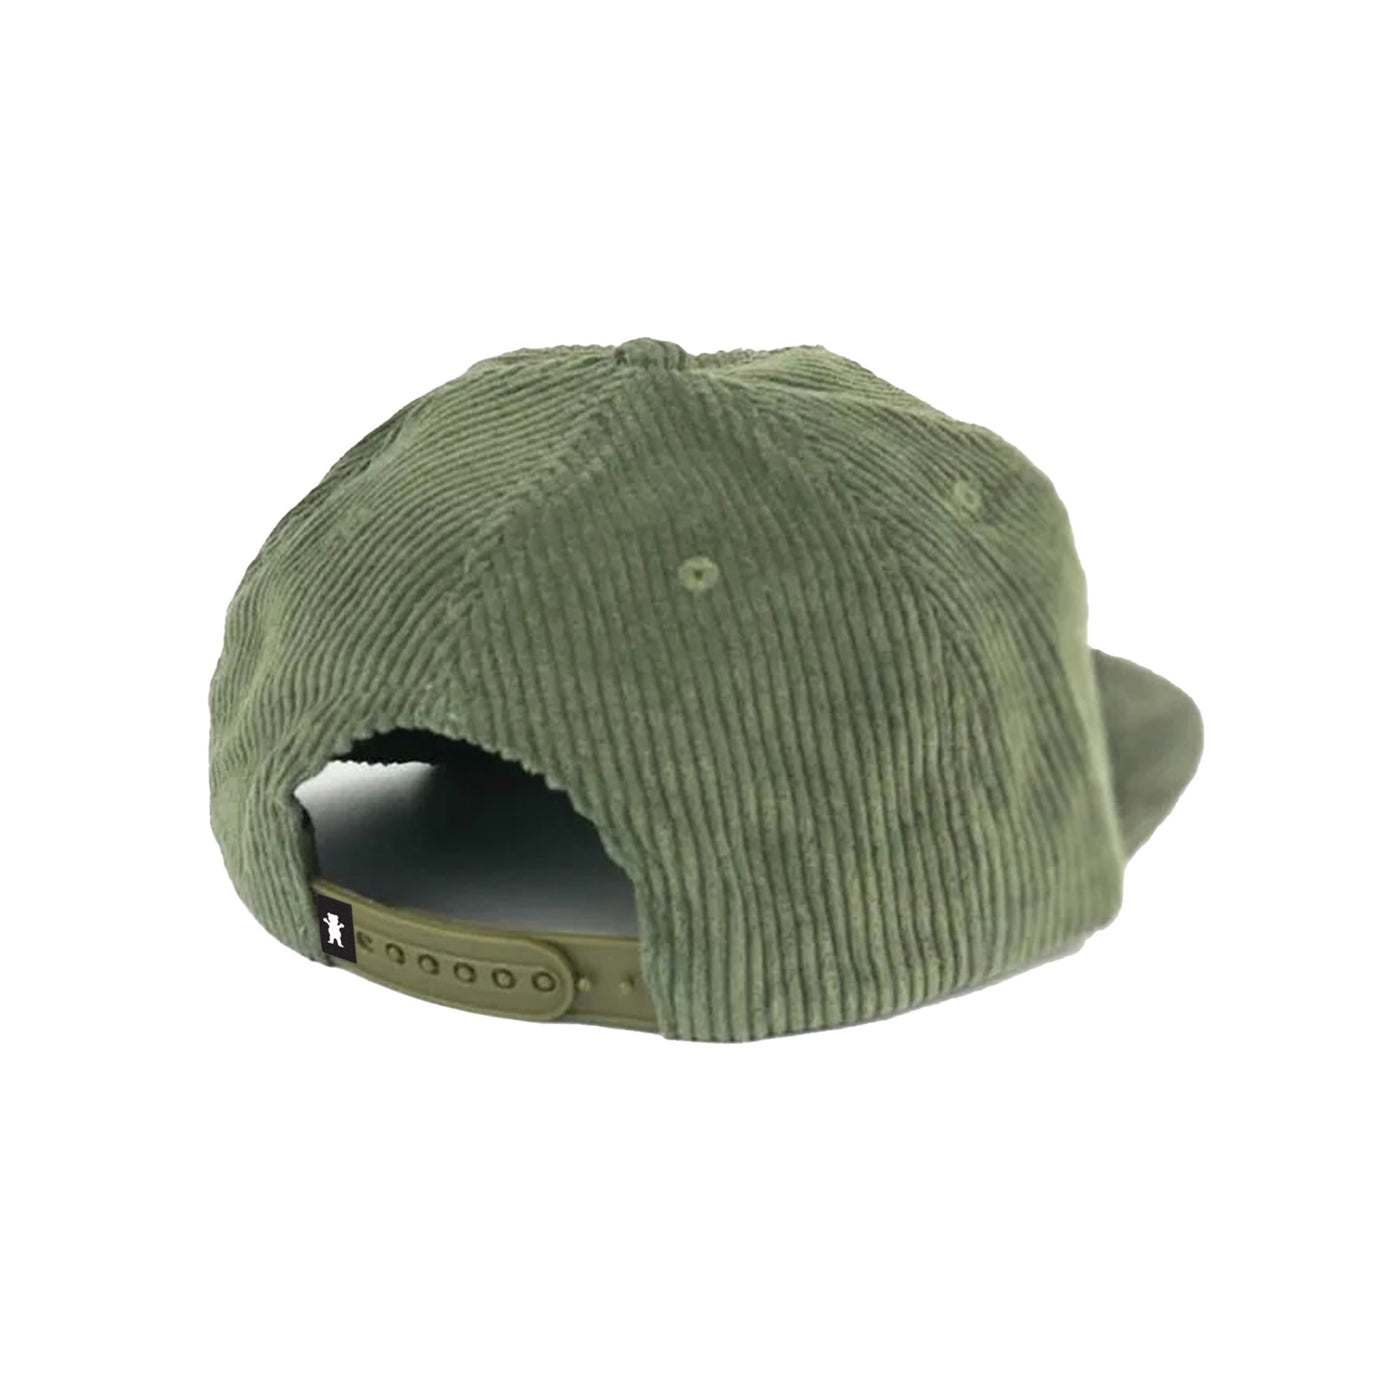 Most High Unstructured Snapback Hat - Forrest Green